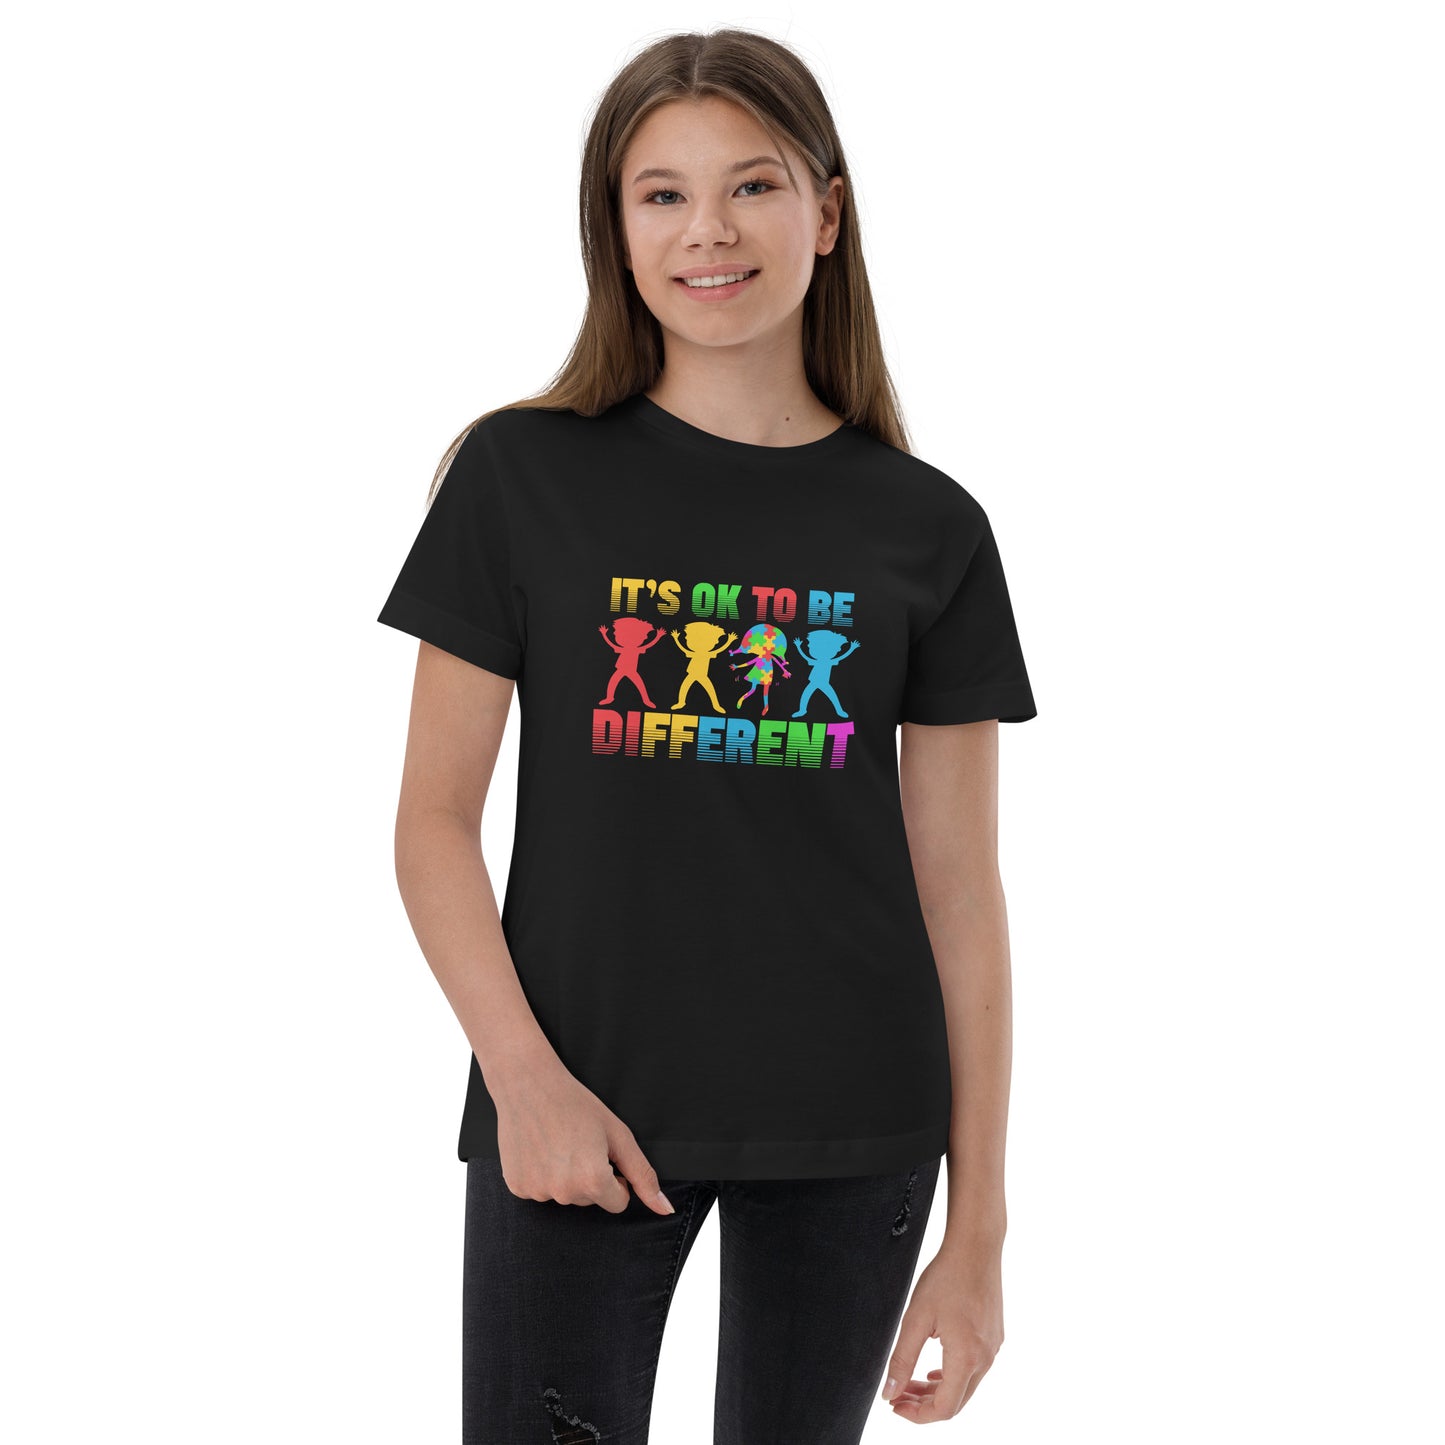 It's Ok to be Different Youth jersey t-shirt